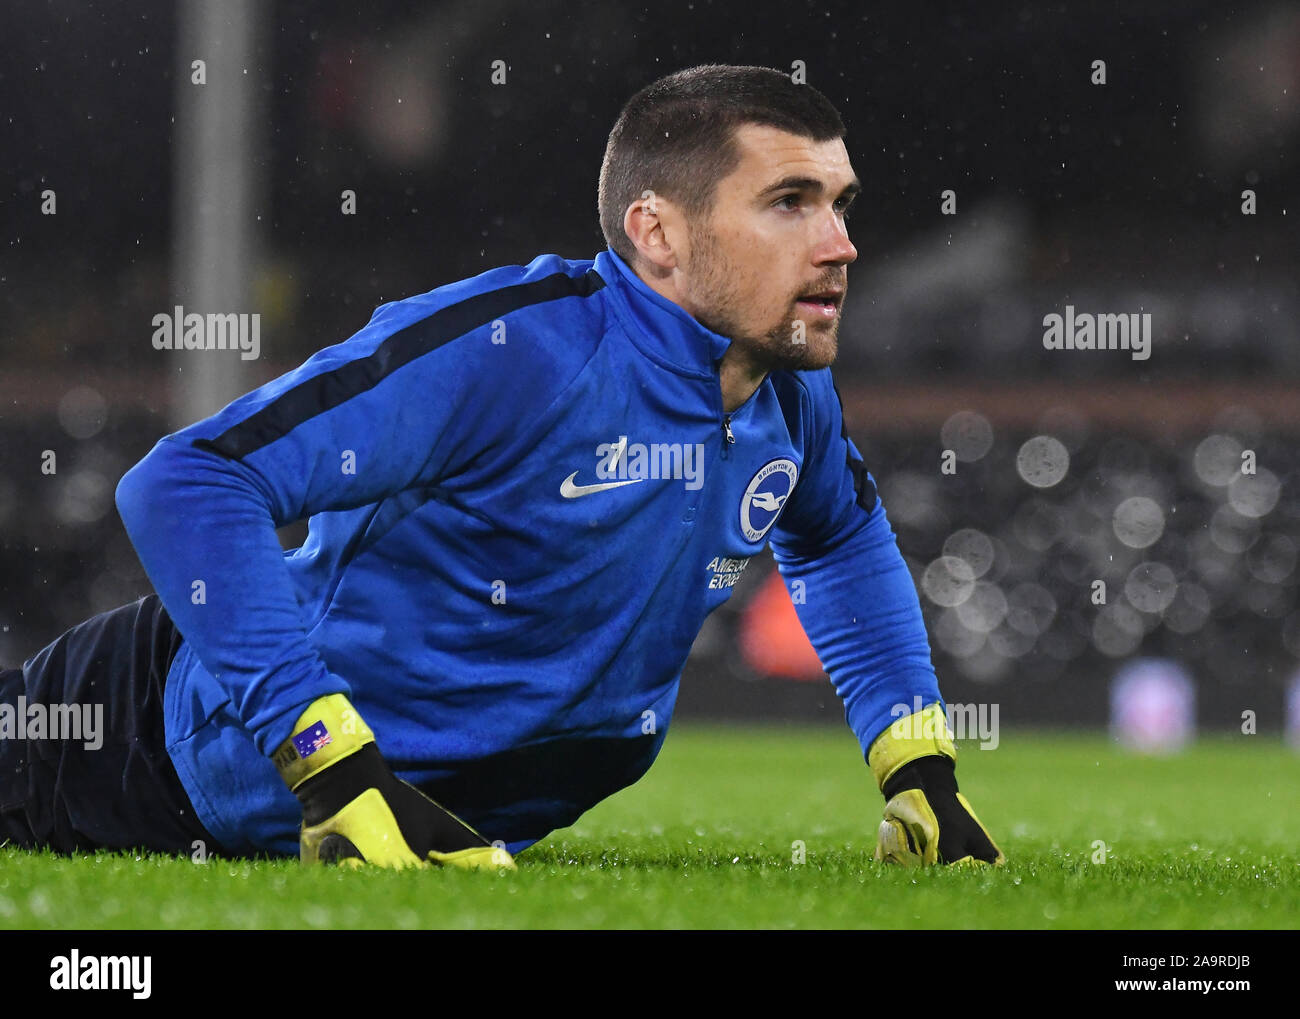 LONDON, ENGLAND - JANUARY 29, 2019: Mathew Ryan of Brighton pictured prior to the 2018/19 Premier League game between Fulham FC and Brighton and Hove Albion at Craven Cottage. Stock Photo